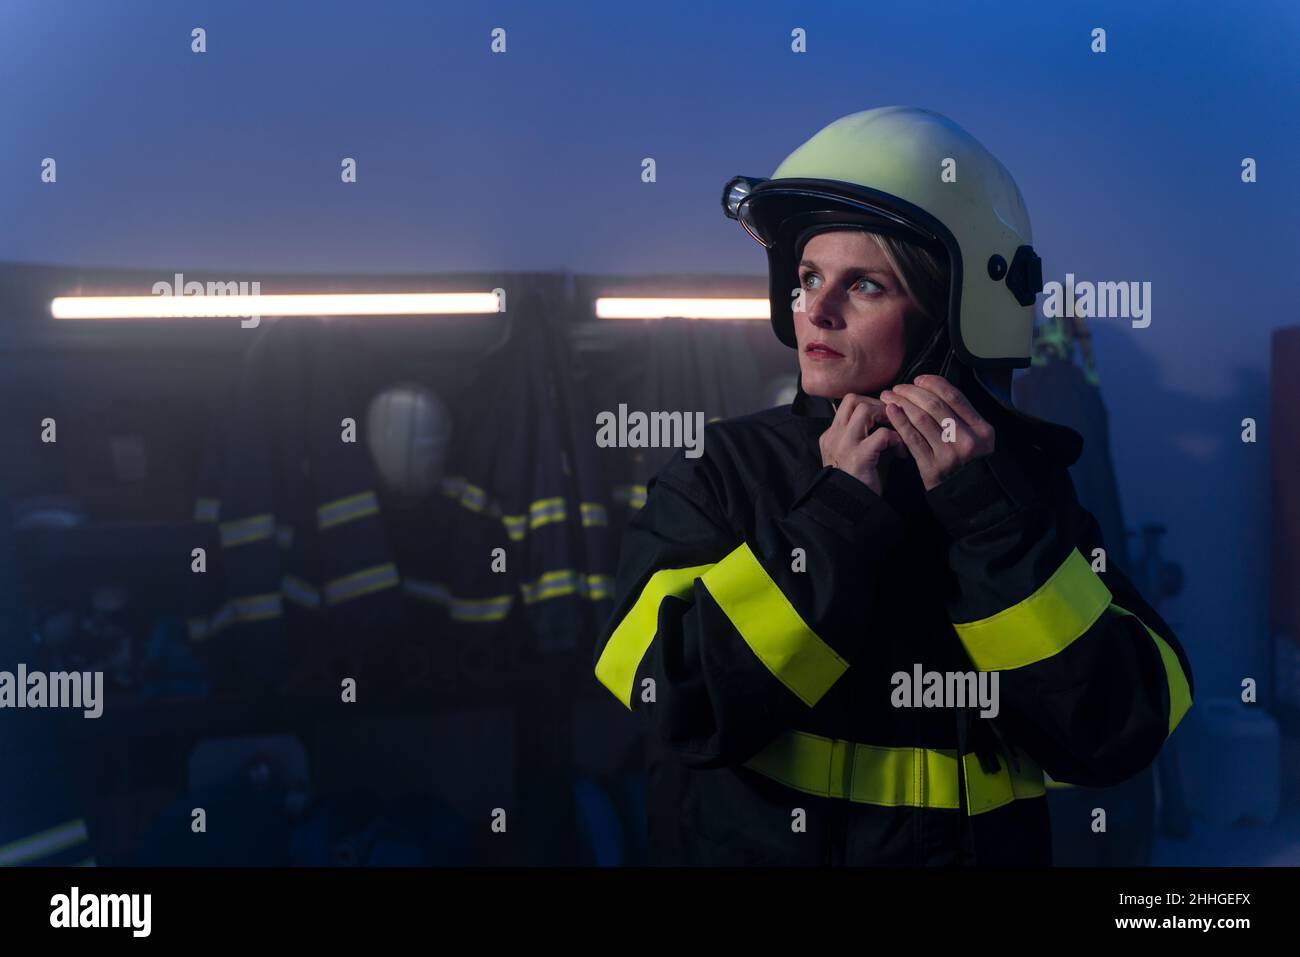 Mid adult female firefighter putting on helmet indoors in fire station at night. Stock Photo